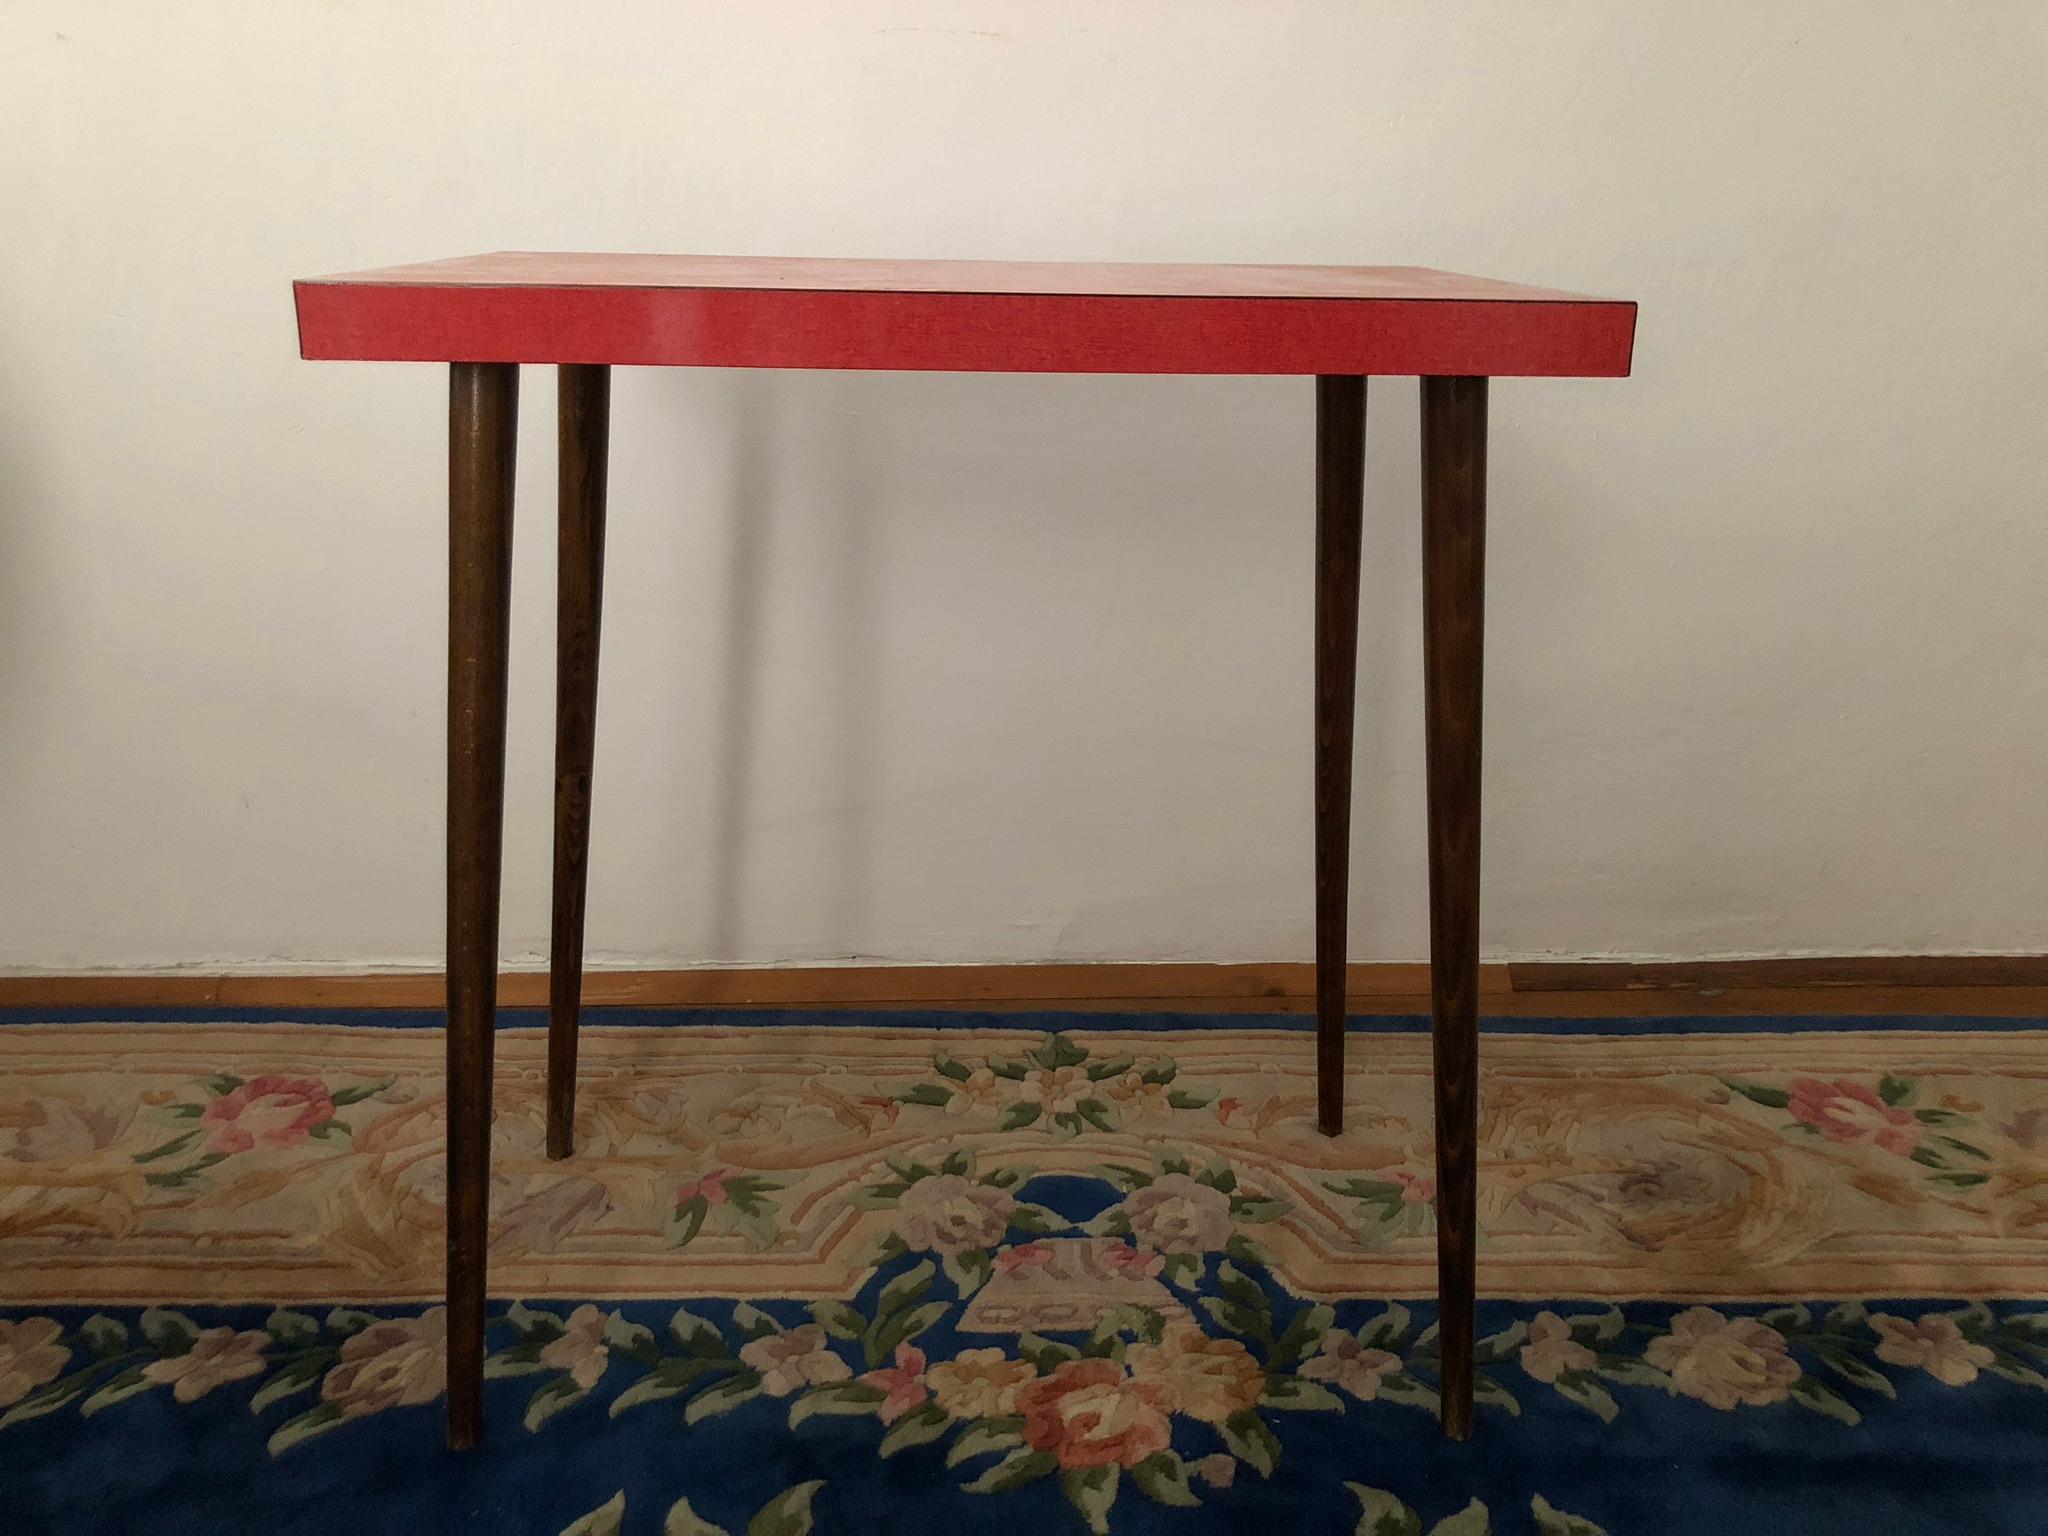 This rare Austrian unattributed design jewel is from the 1950s.
The Resopal top is pink and the legs are made out of cherry wood. The legs are standing rectangular and gives a very fun edge to it.